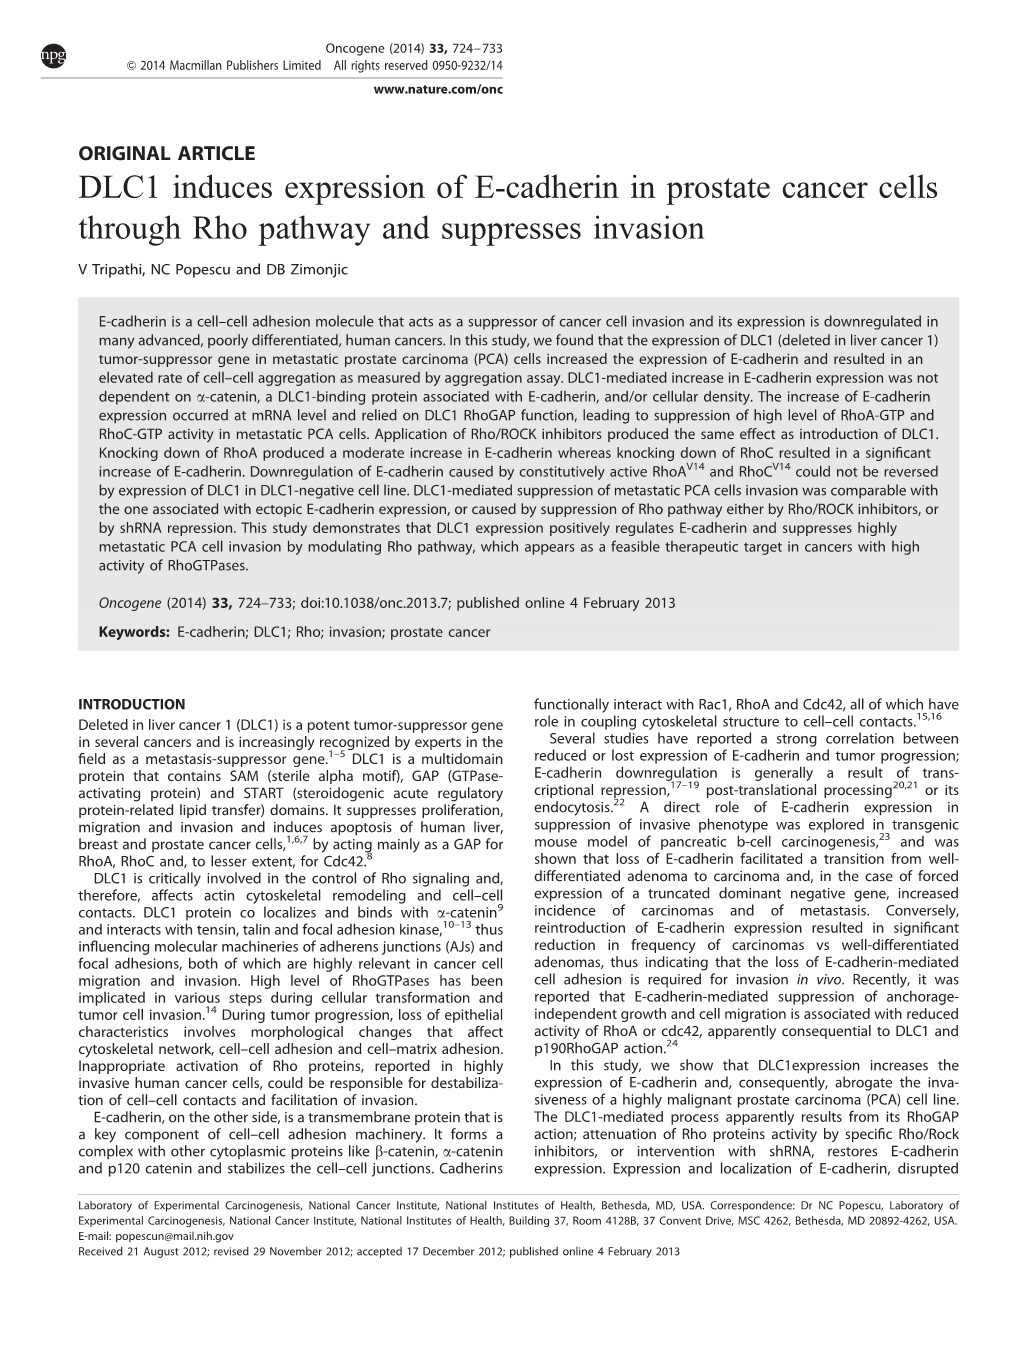 DLC1 Induces Expression of E-Cadherin in Prostate Cancer Cells Through Rho Pathway and Suppresses Invasion